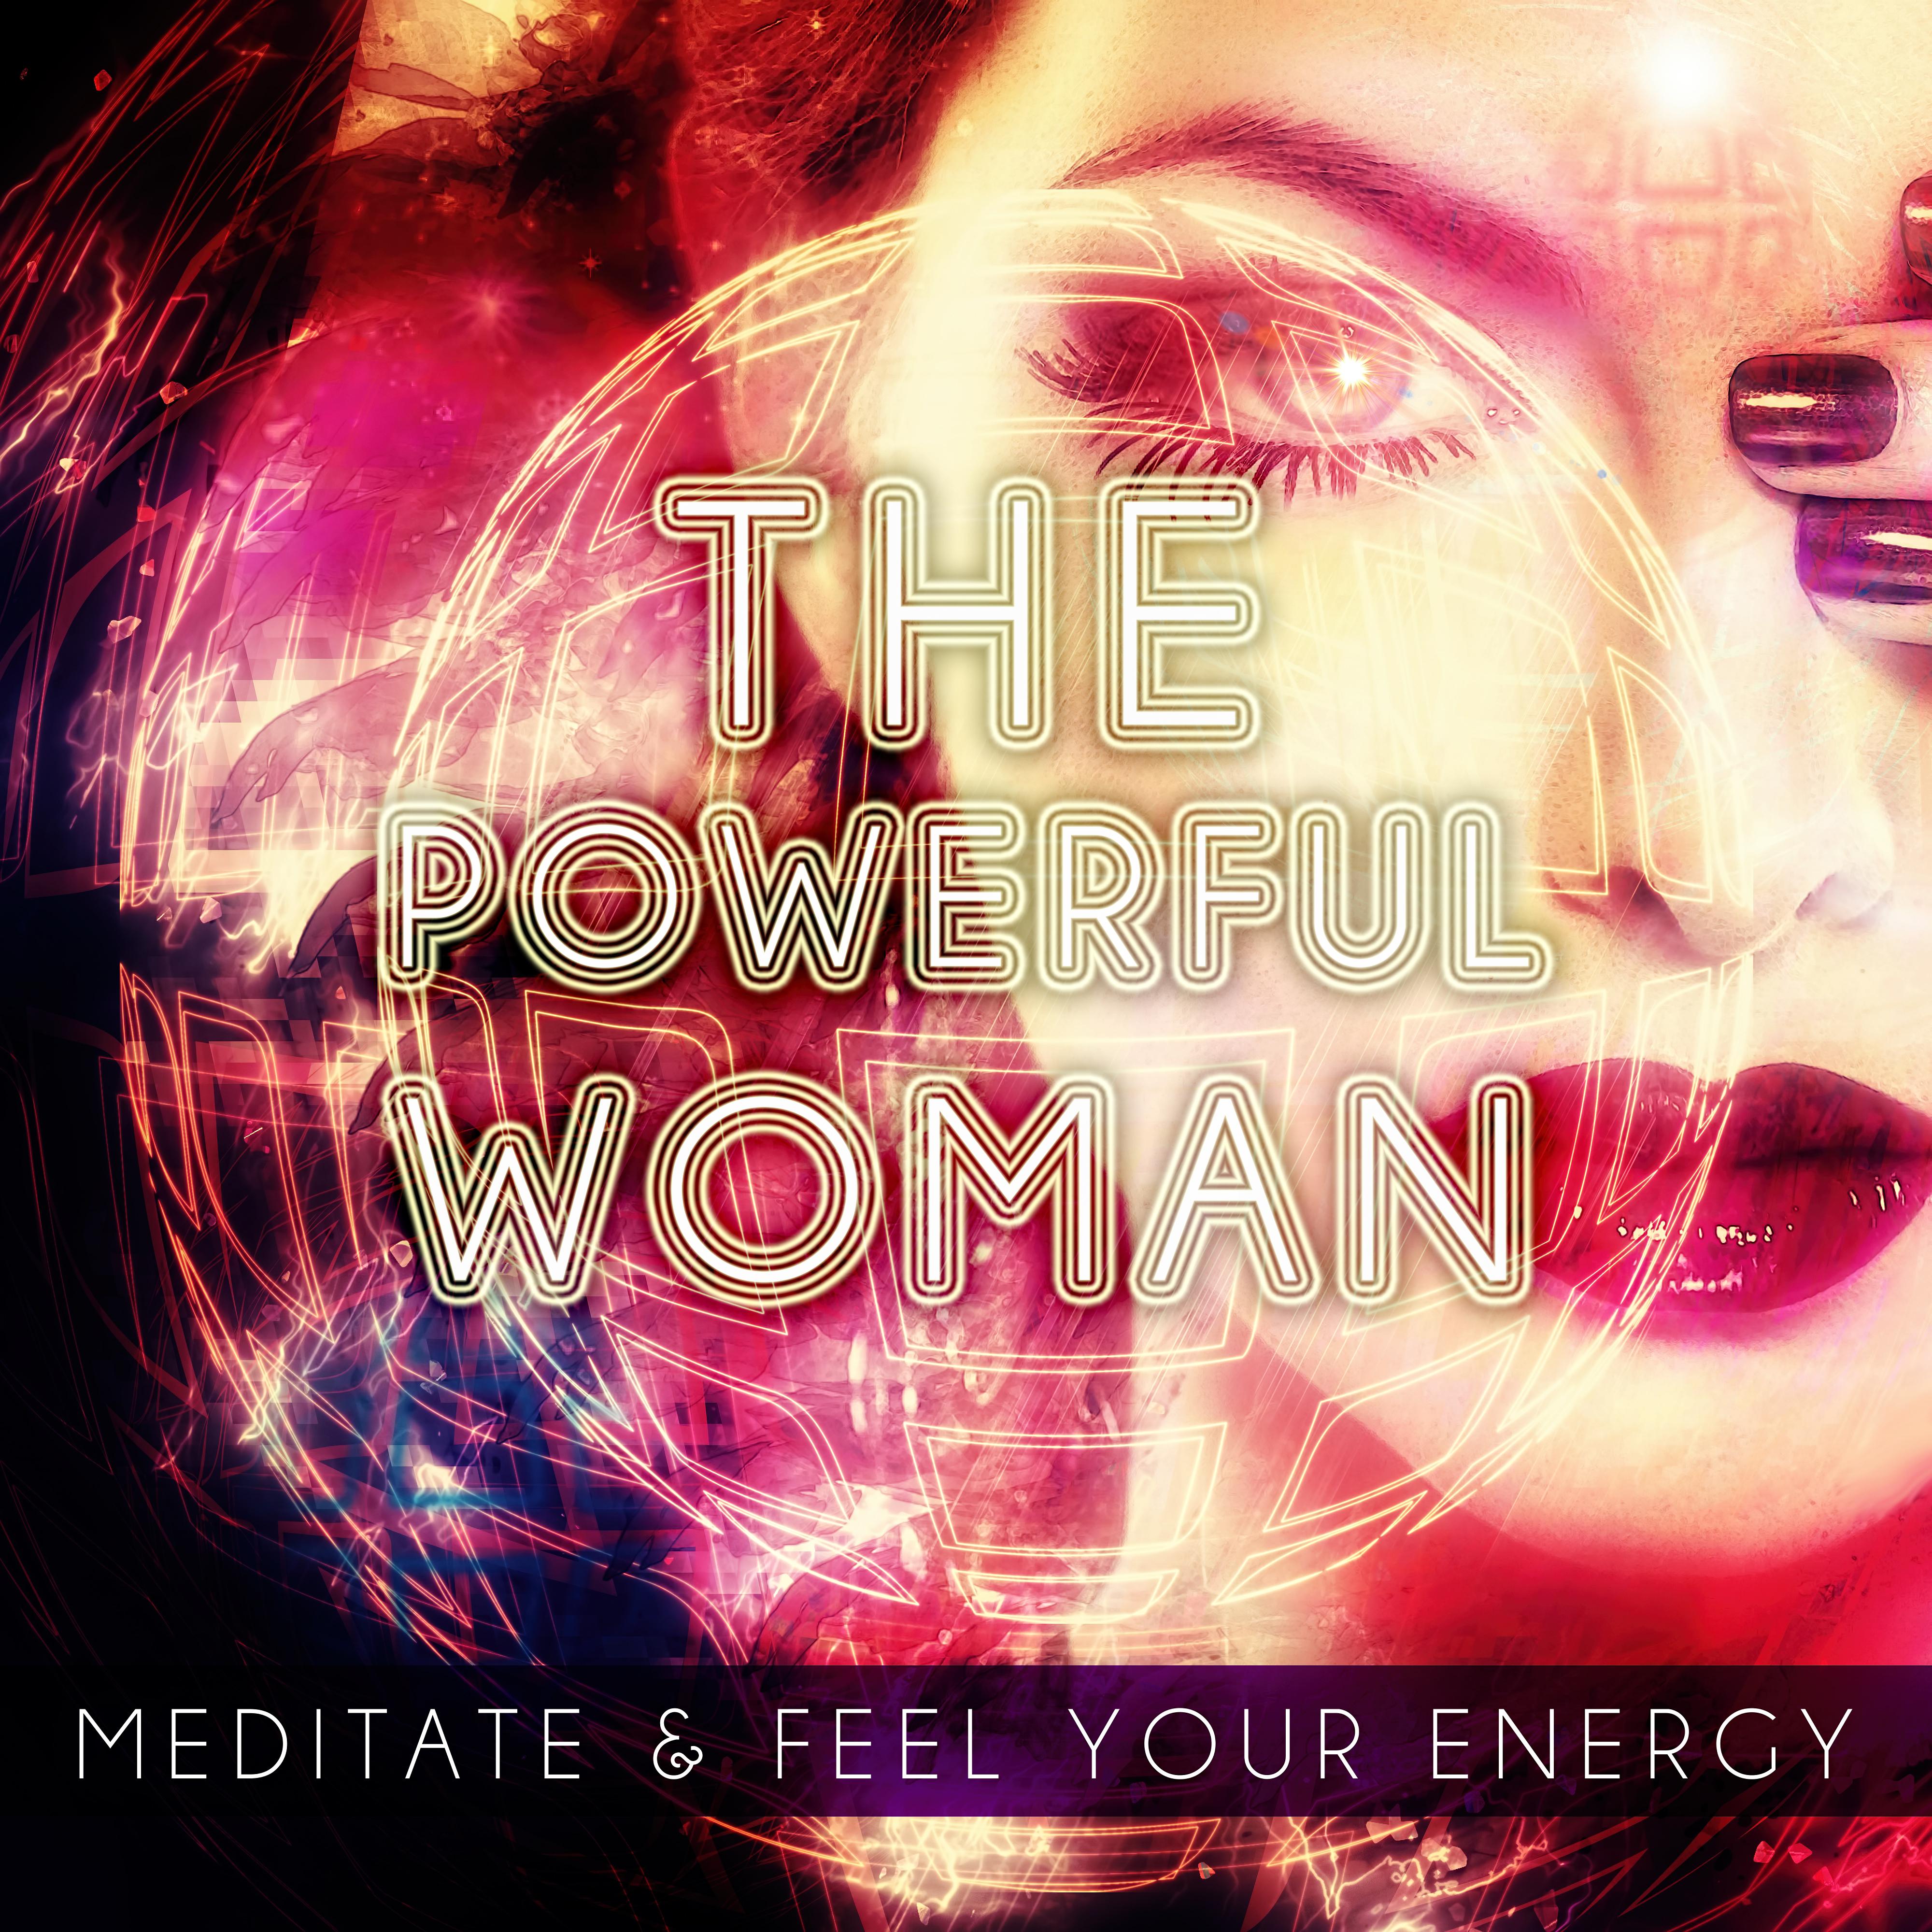 The Powerful Women - Meditate and Feel Your Energy Life by Listening to the Nature Ocean Sounds, Relaxing New Age Music